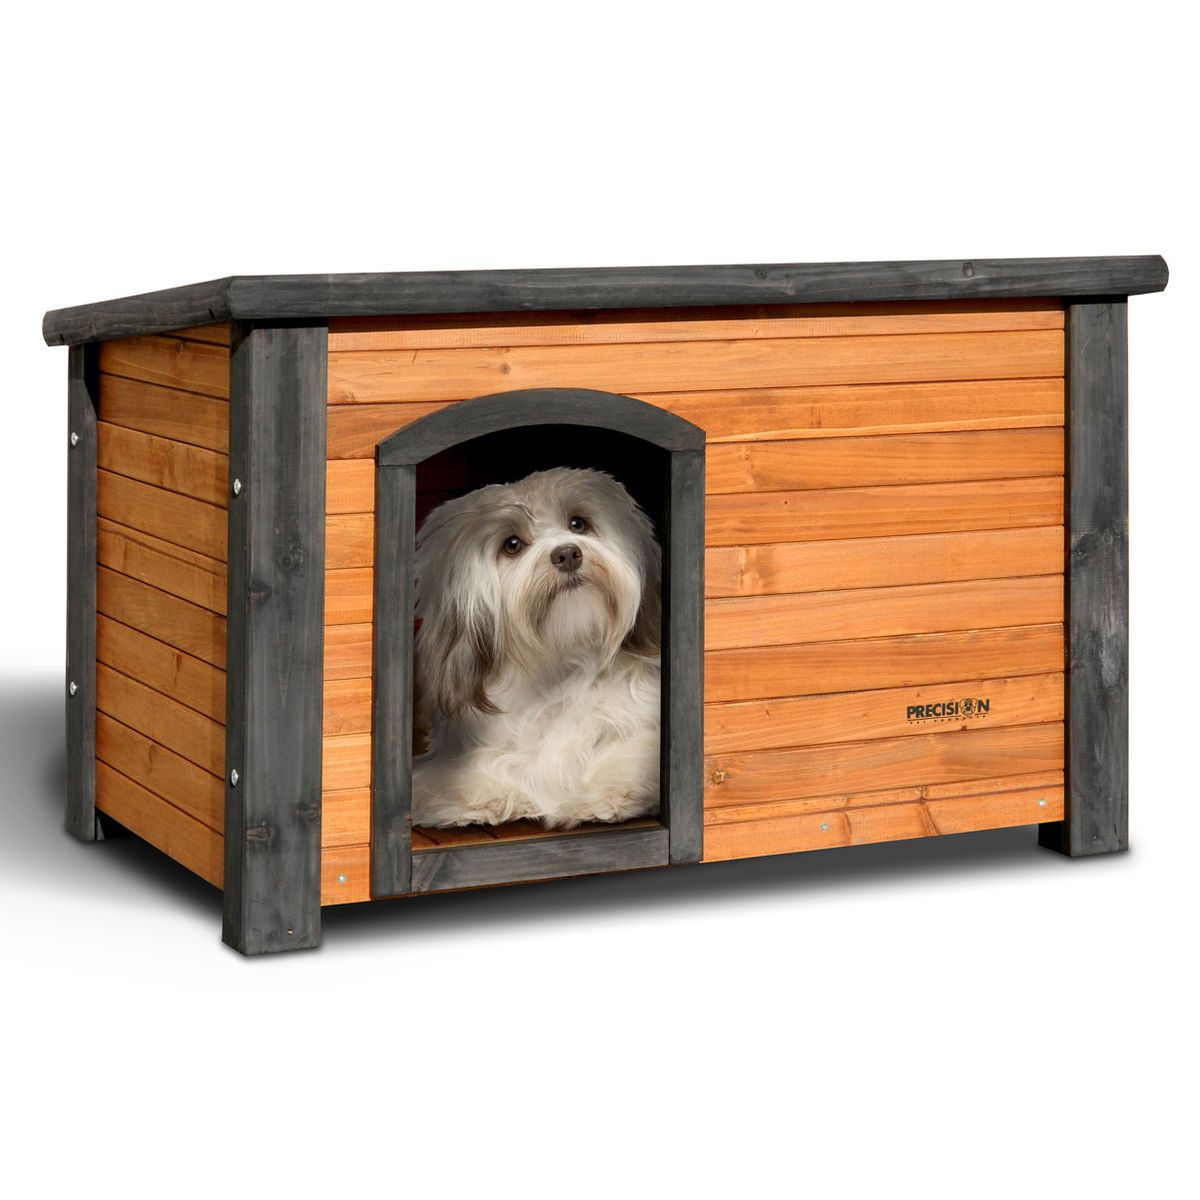 26 99 outback large country lodge dog house today $ 104 99